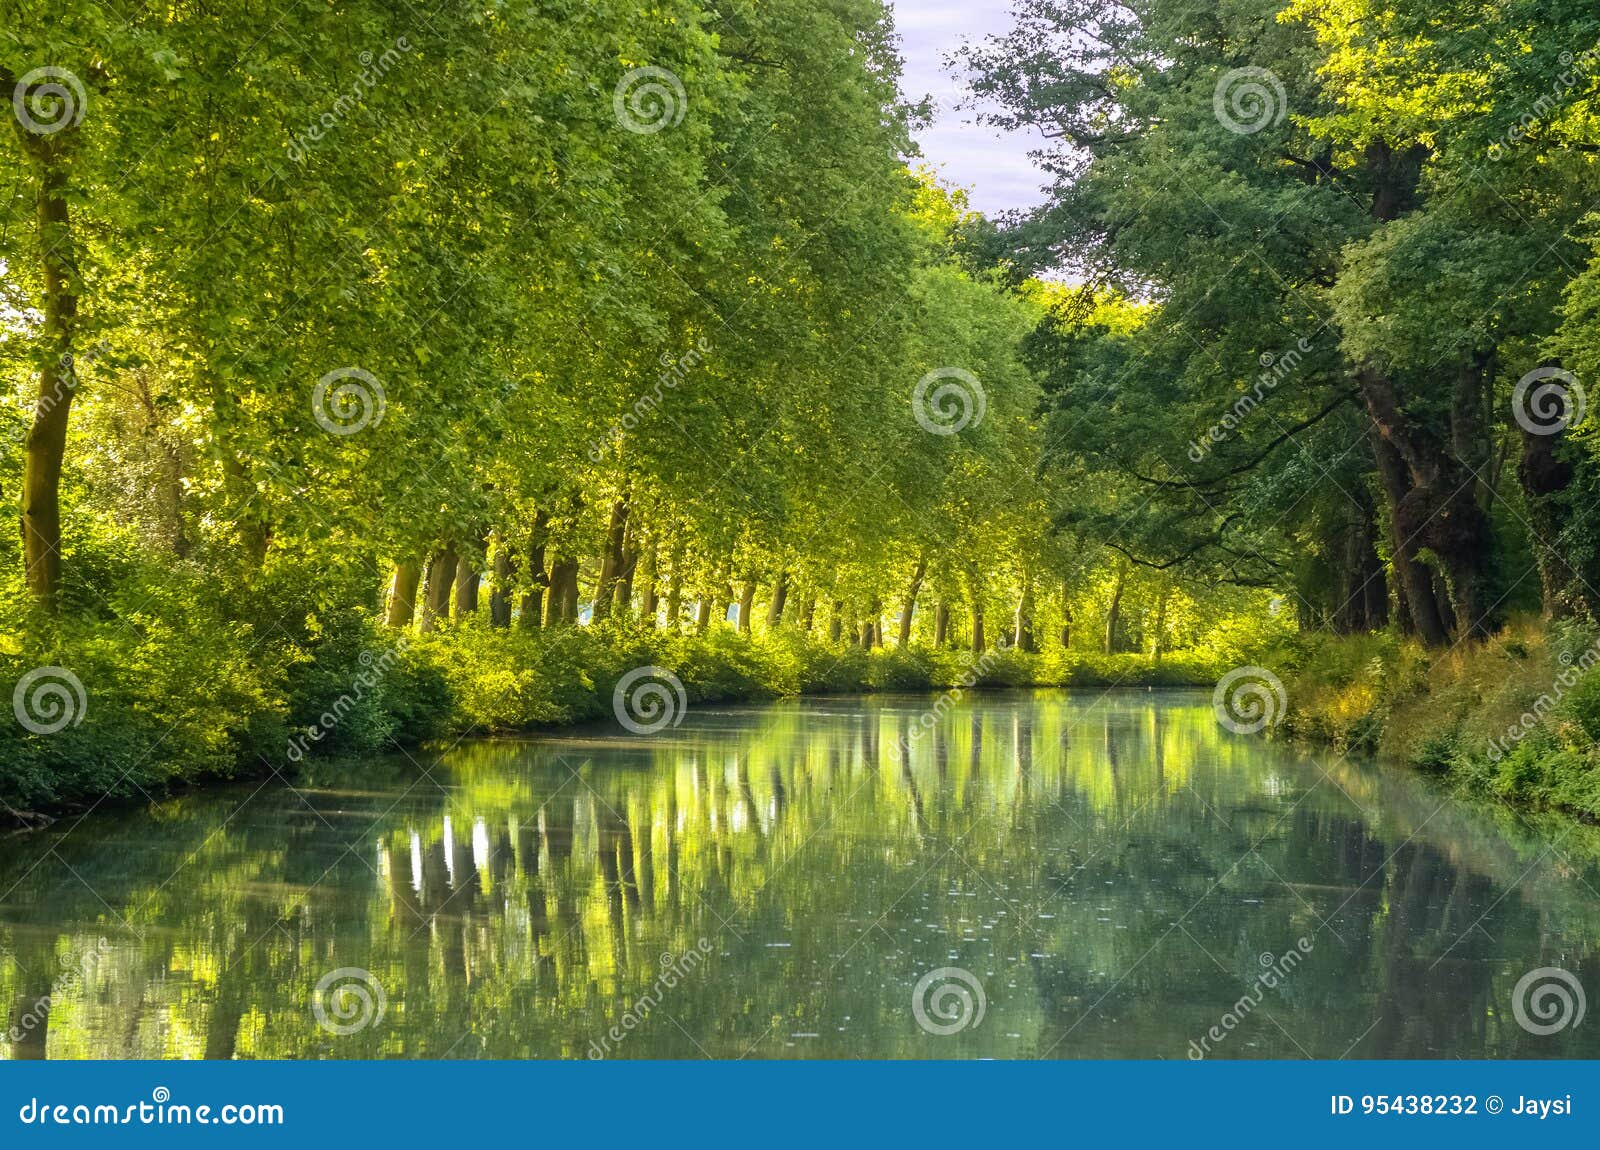 canal du midi, sycamore trees reflection in water, france